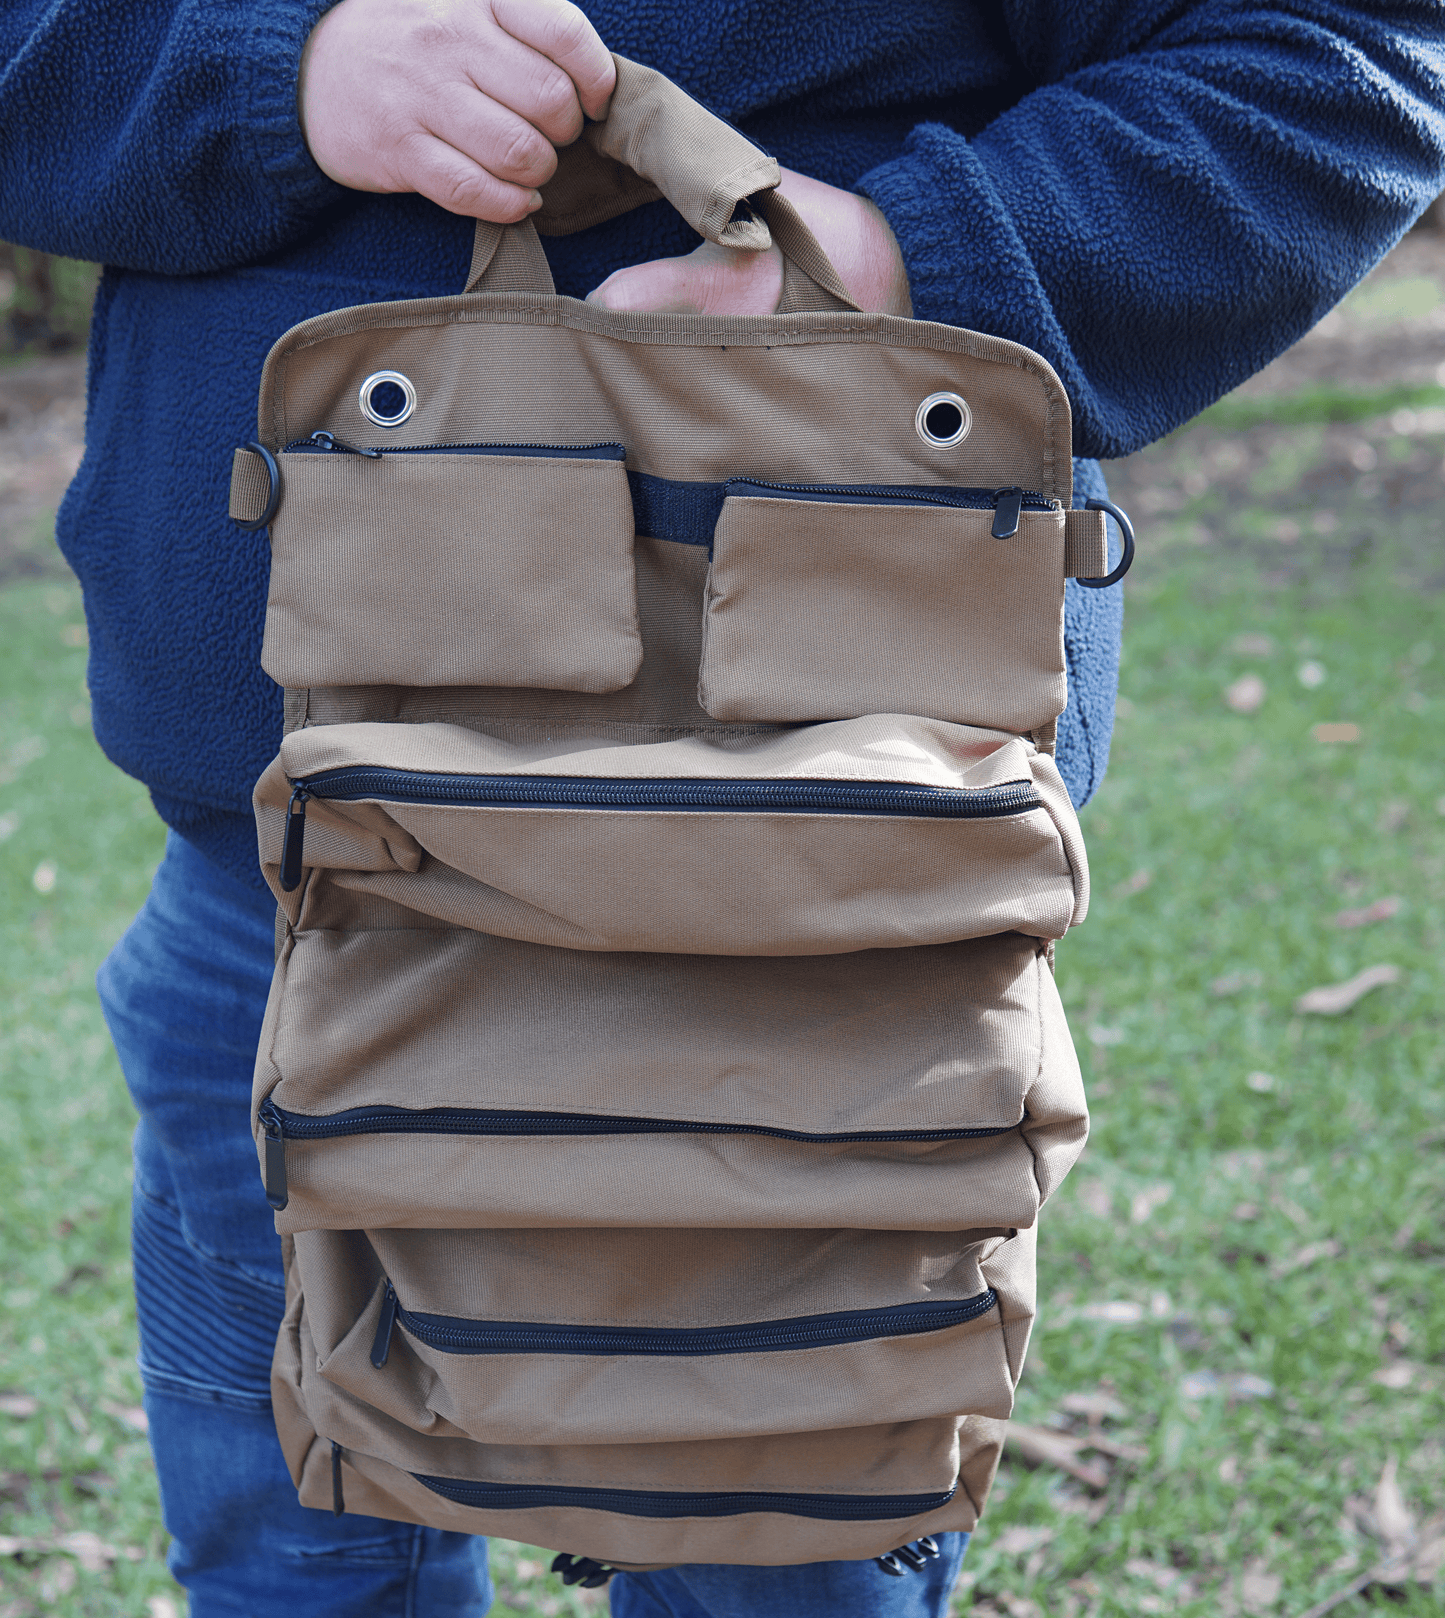 Riley Rugged Roll-Up Bag with Shoulder Harness - 0 - CozyBuys